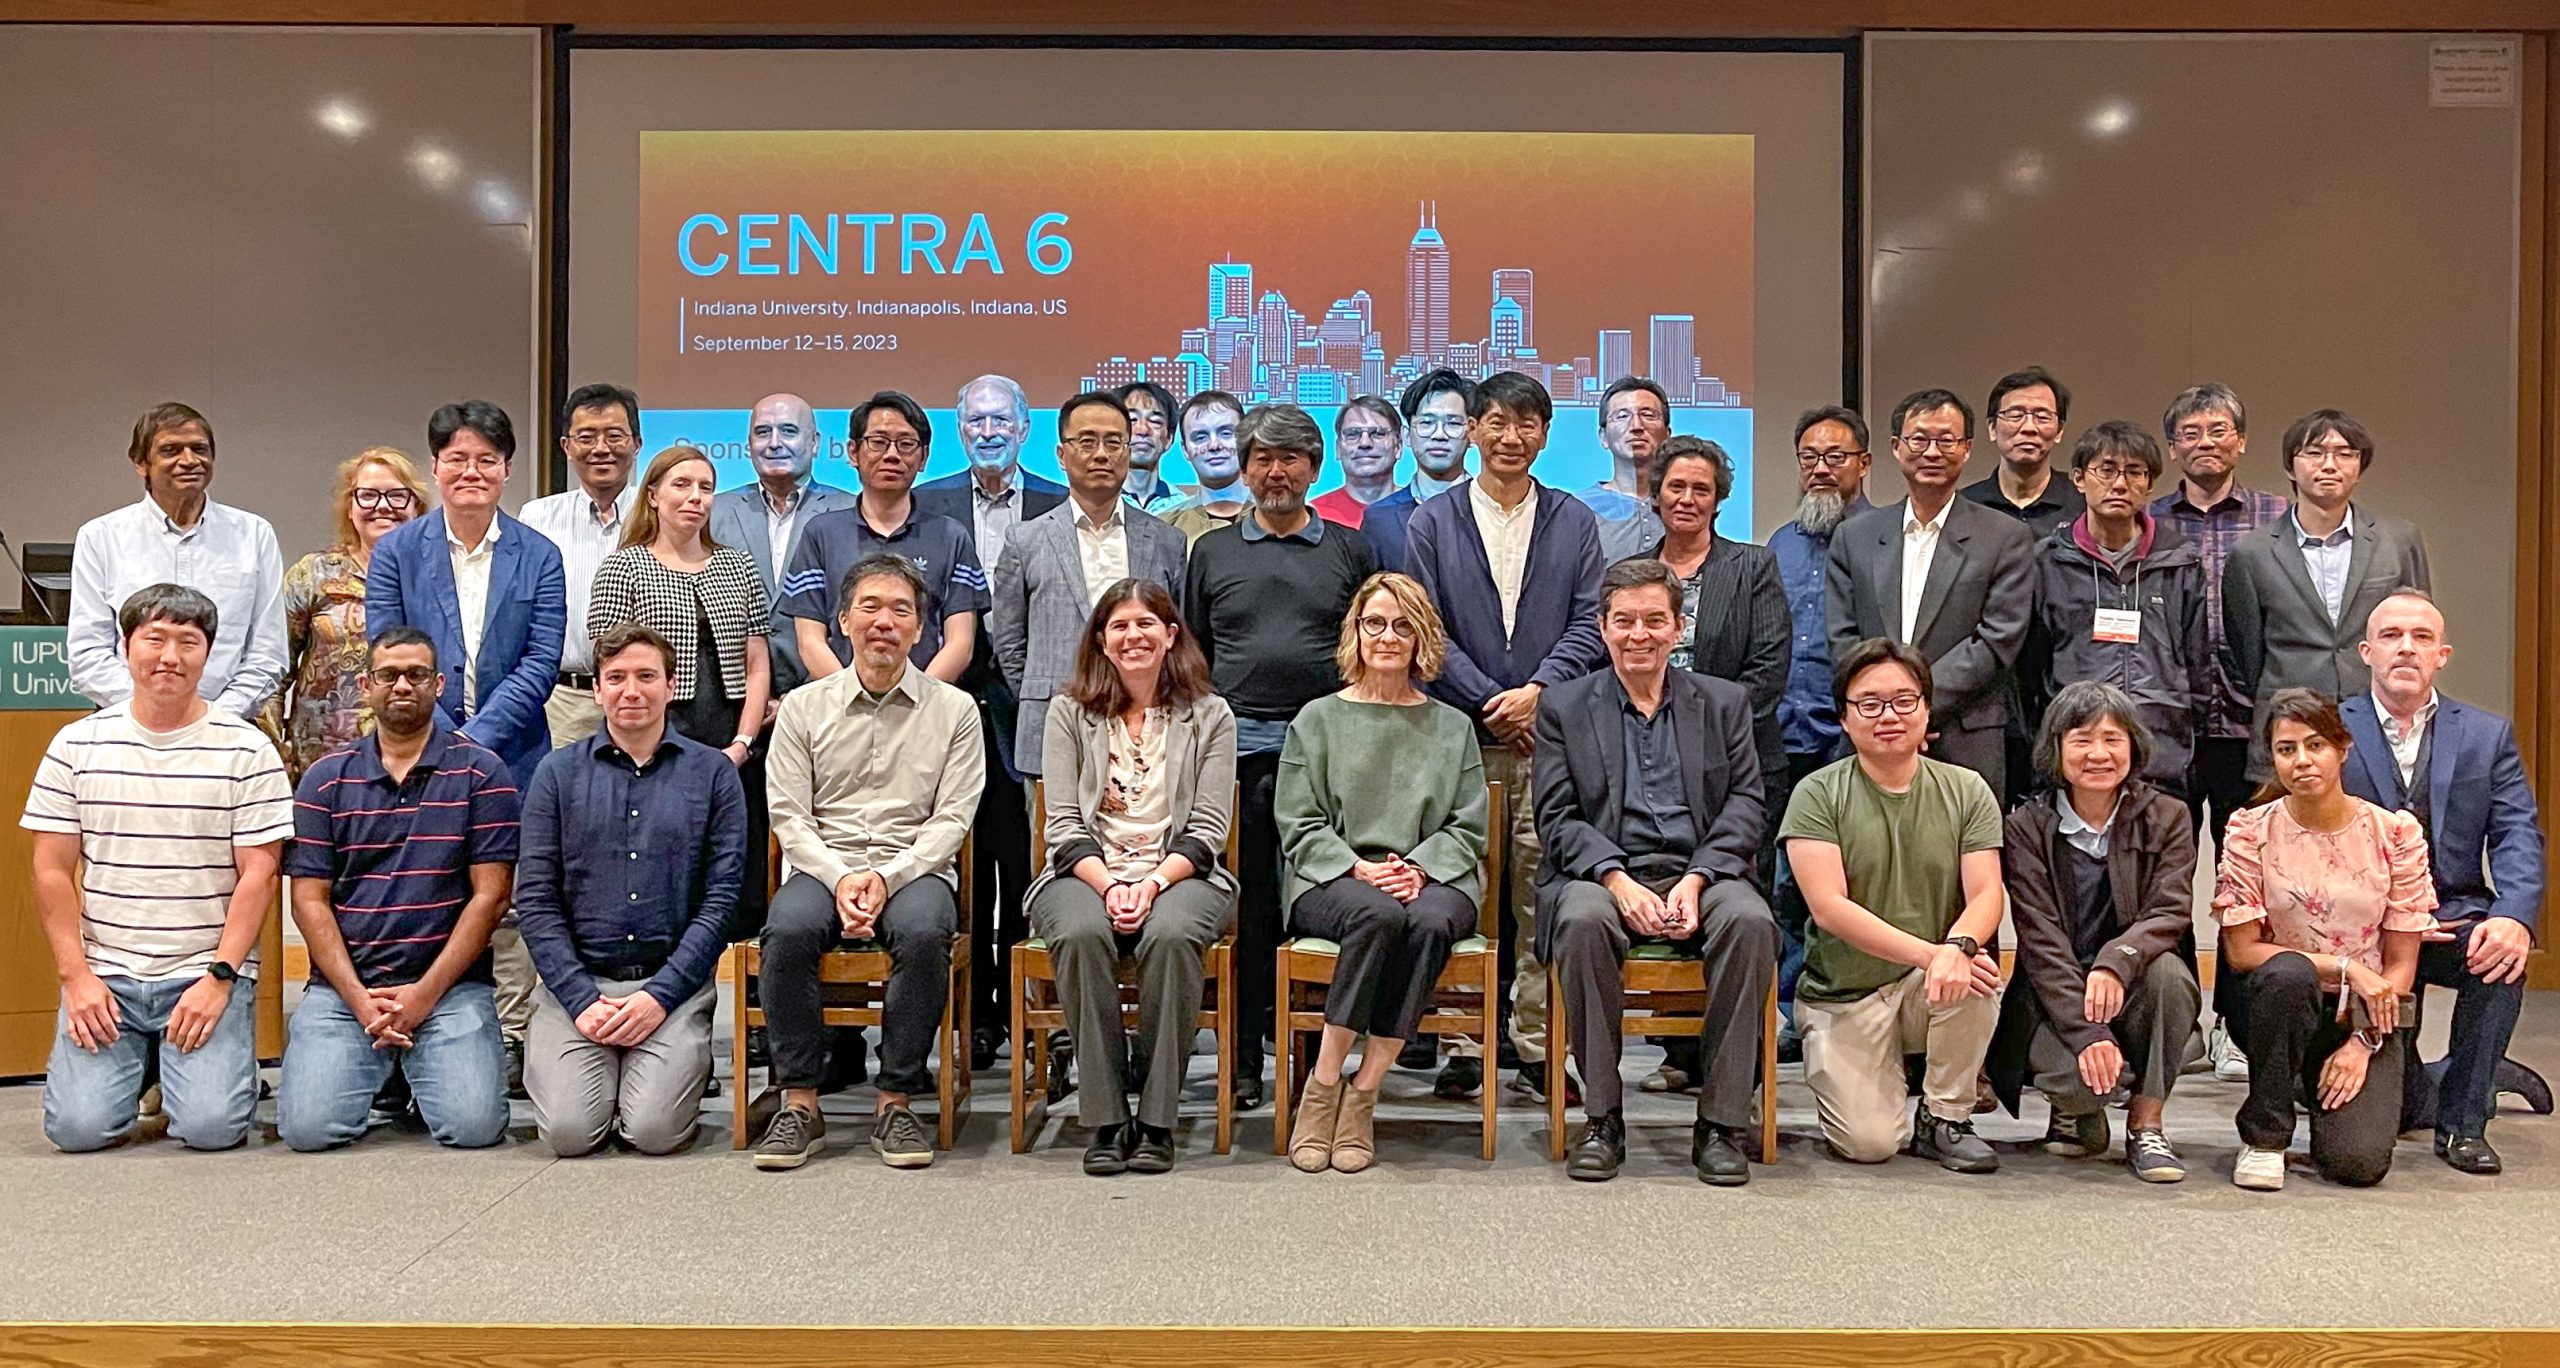 CENTRA 6 attendees